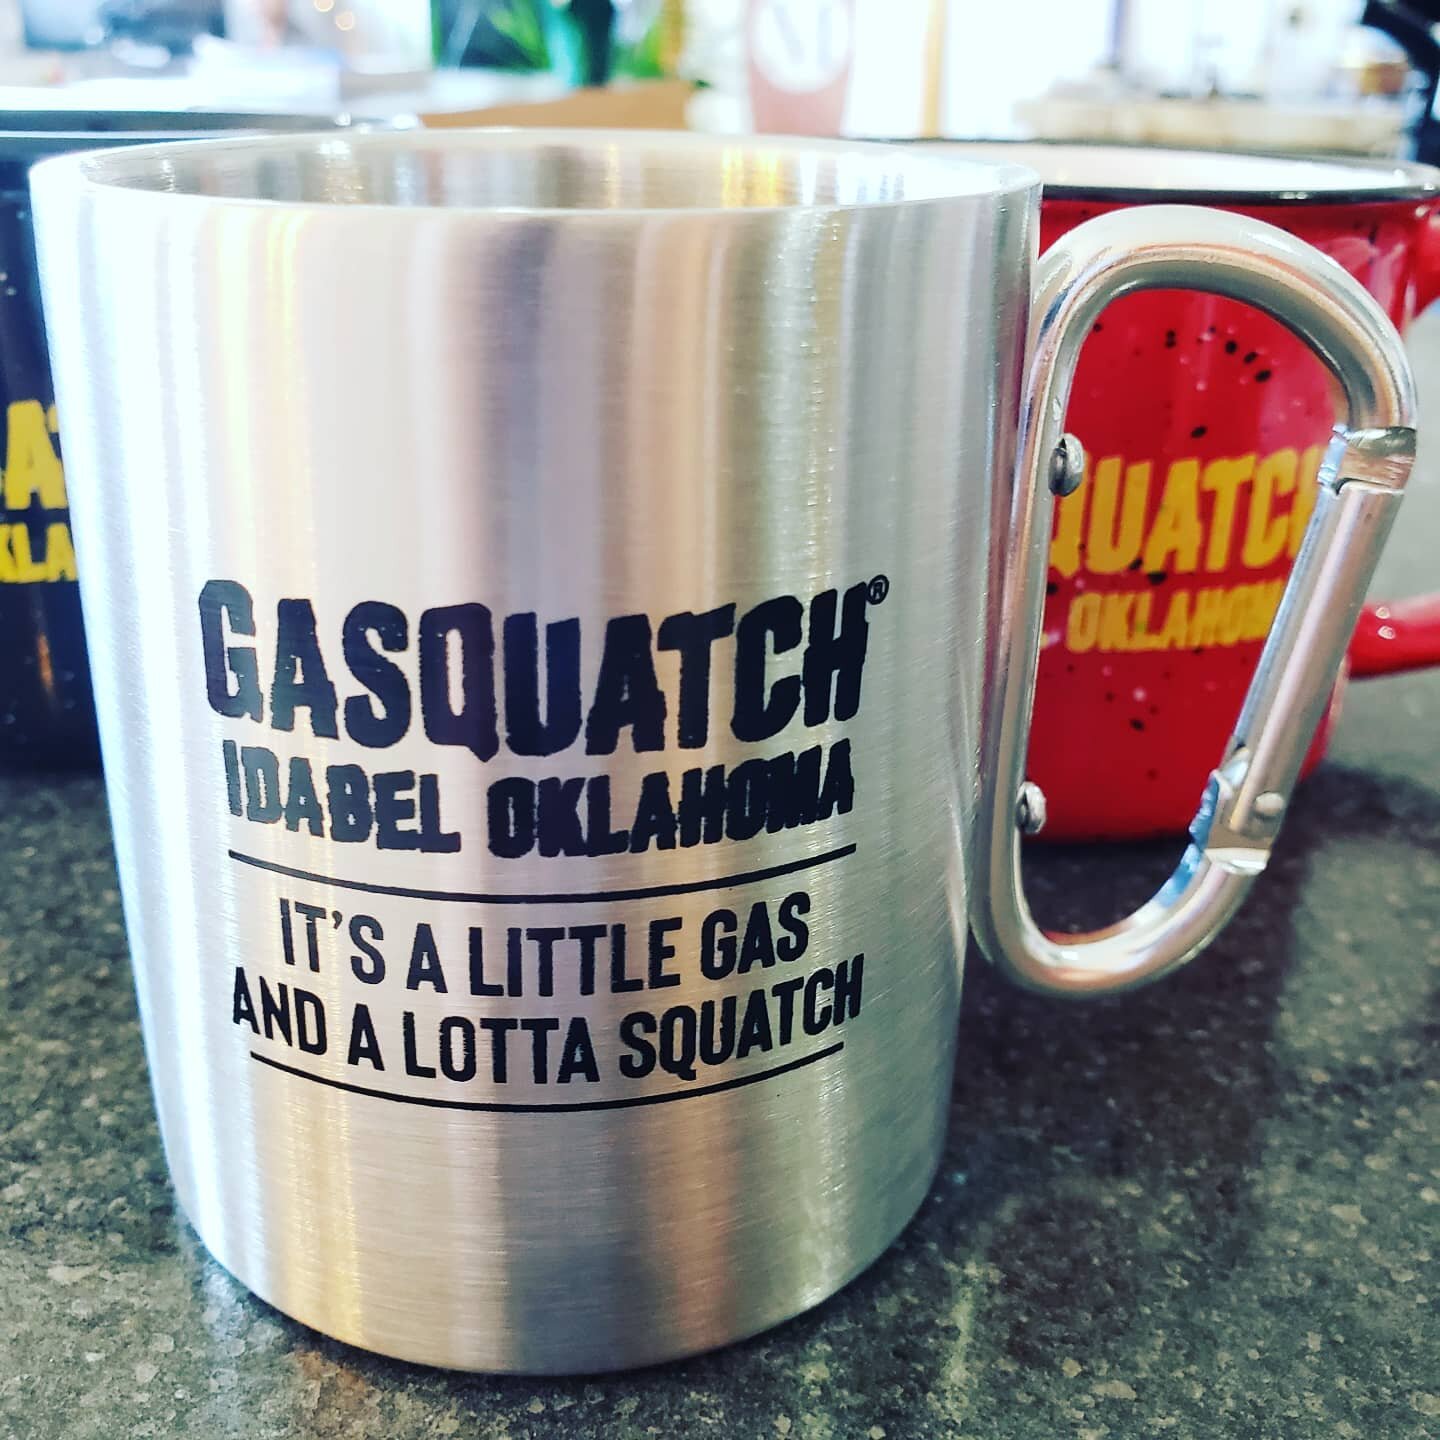 Camping gear. Gasquatch style. #gasquatch #promotionalproducts